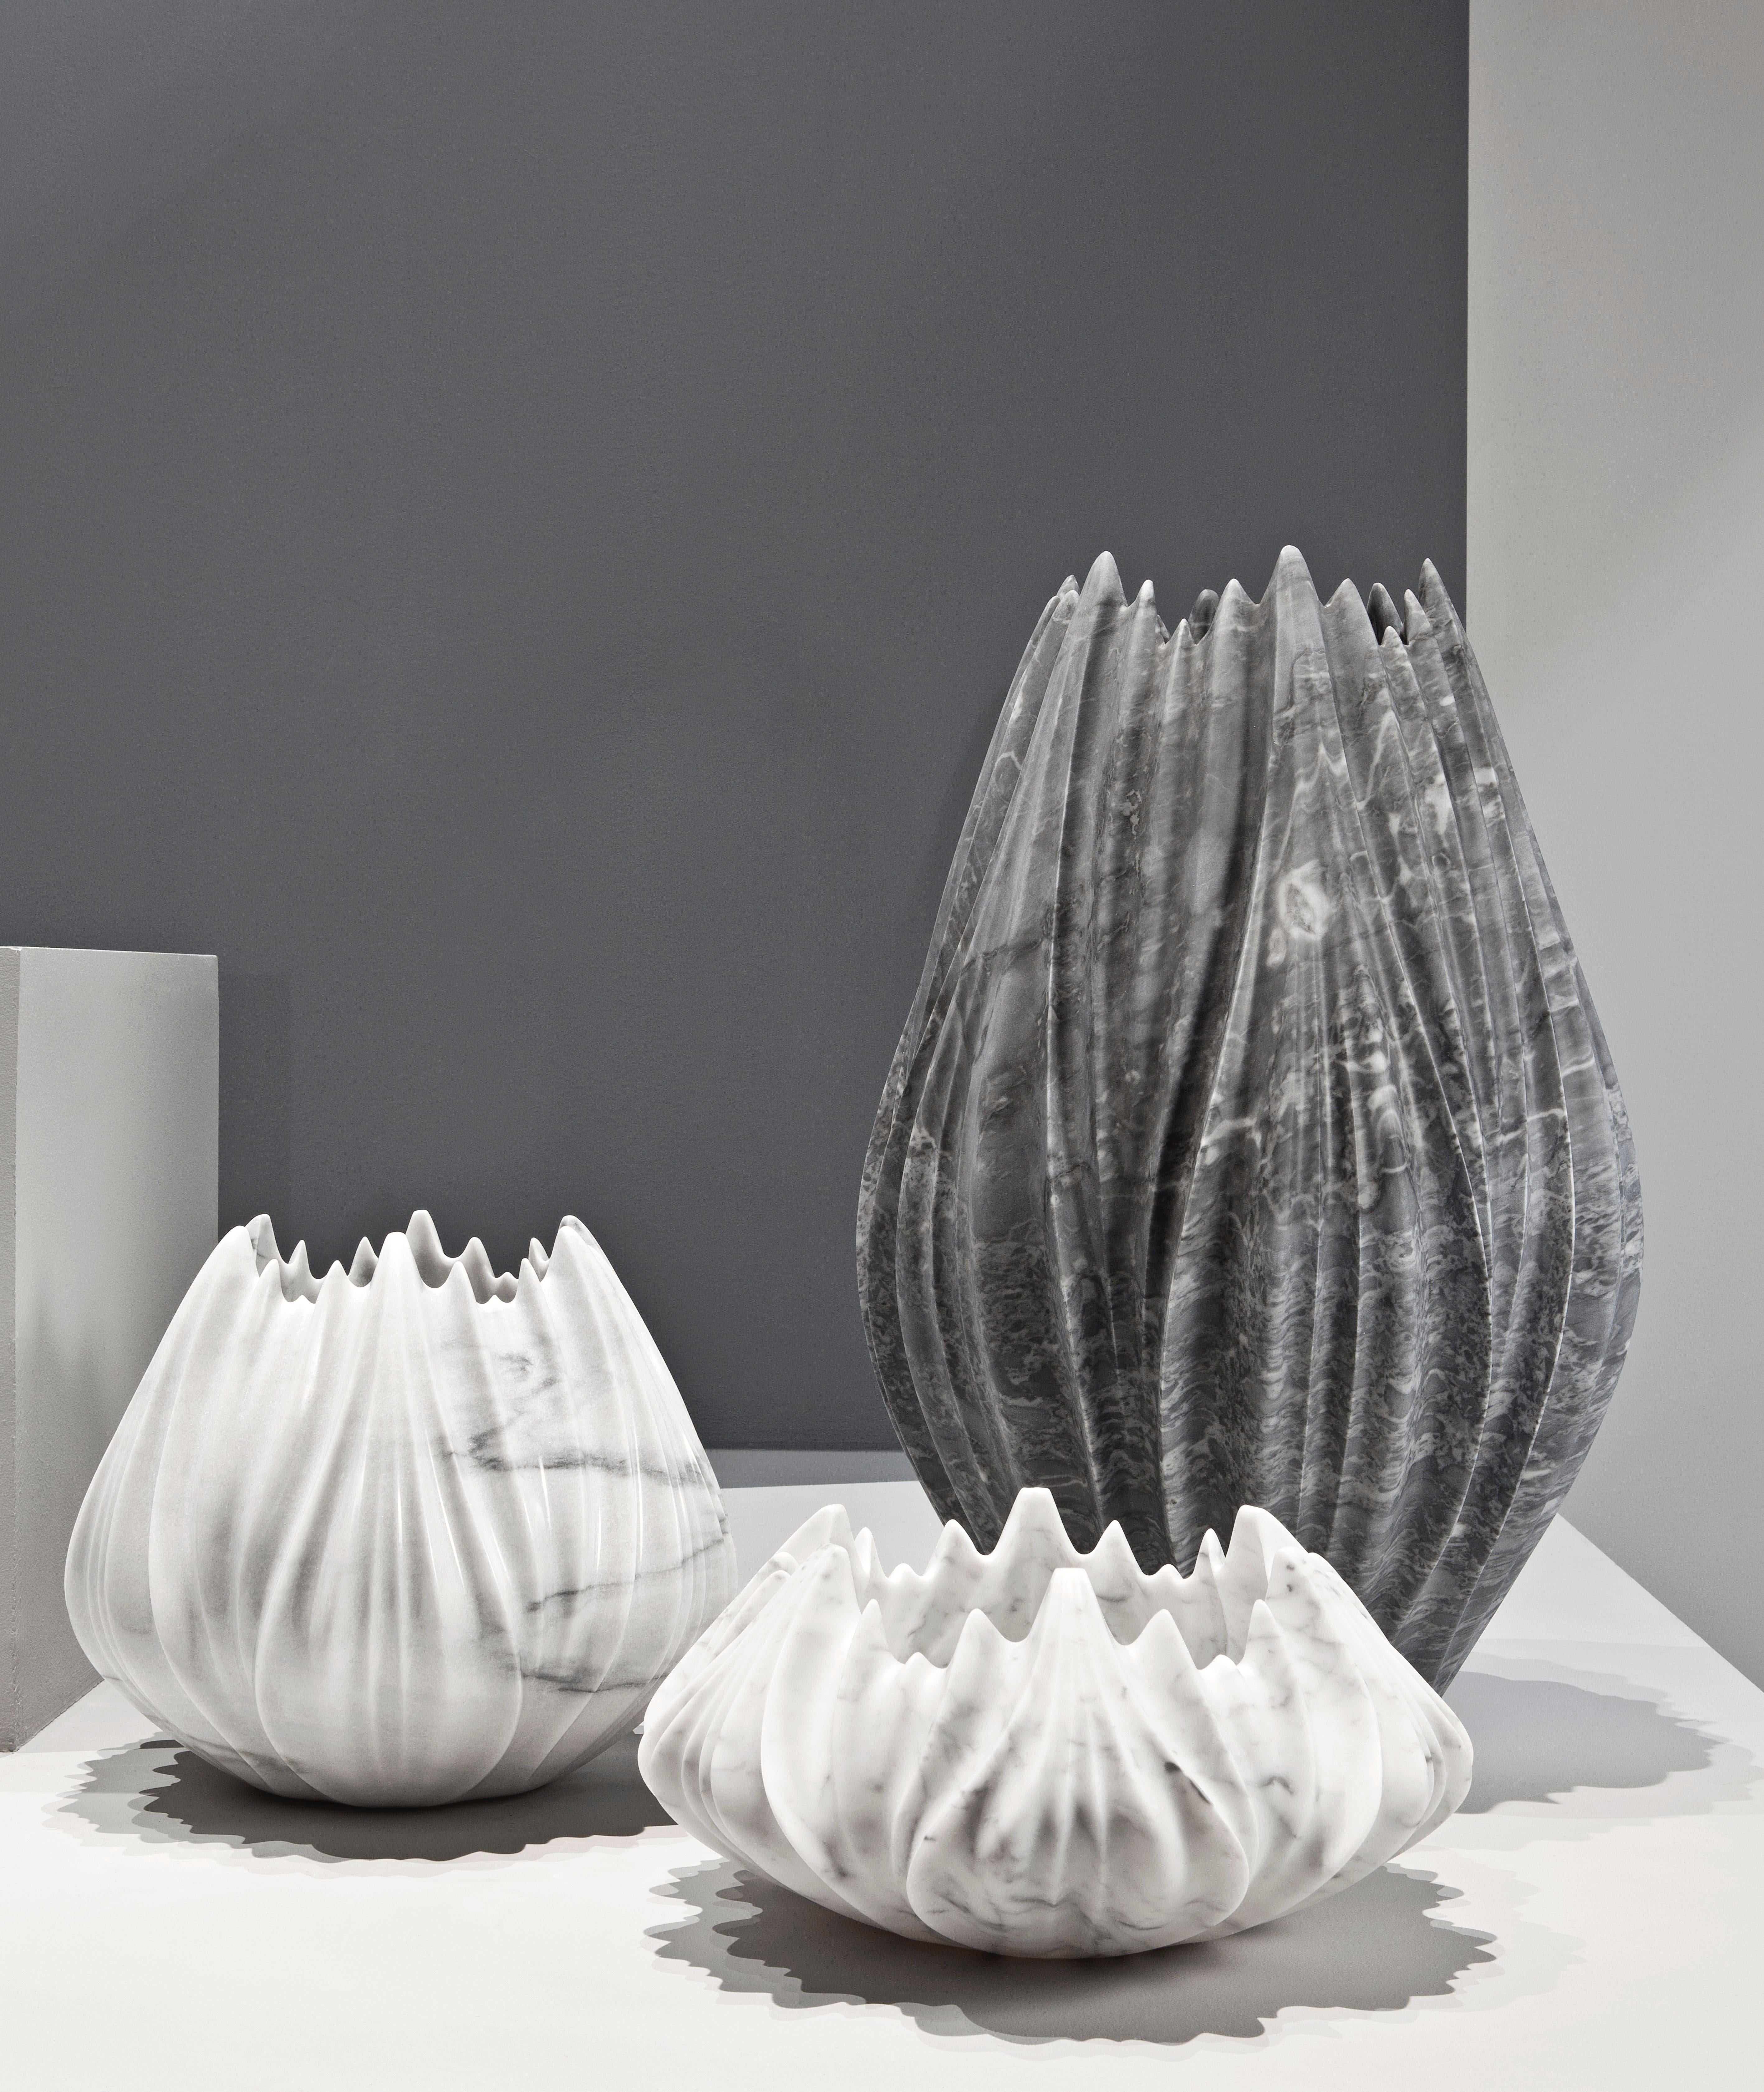 Created by Zaha Hadid together with polished statuario marble. This series includes 4 other designs. Limited edition of 24

The Tau vases created by Zaha Hadid appear organic; emerging as a series of intricately rendered pleats expressing the formal